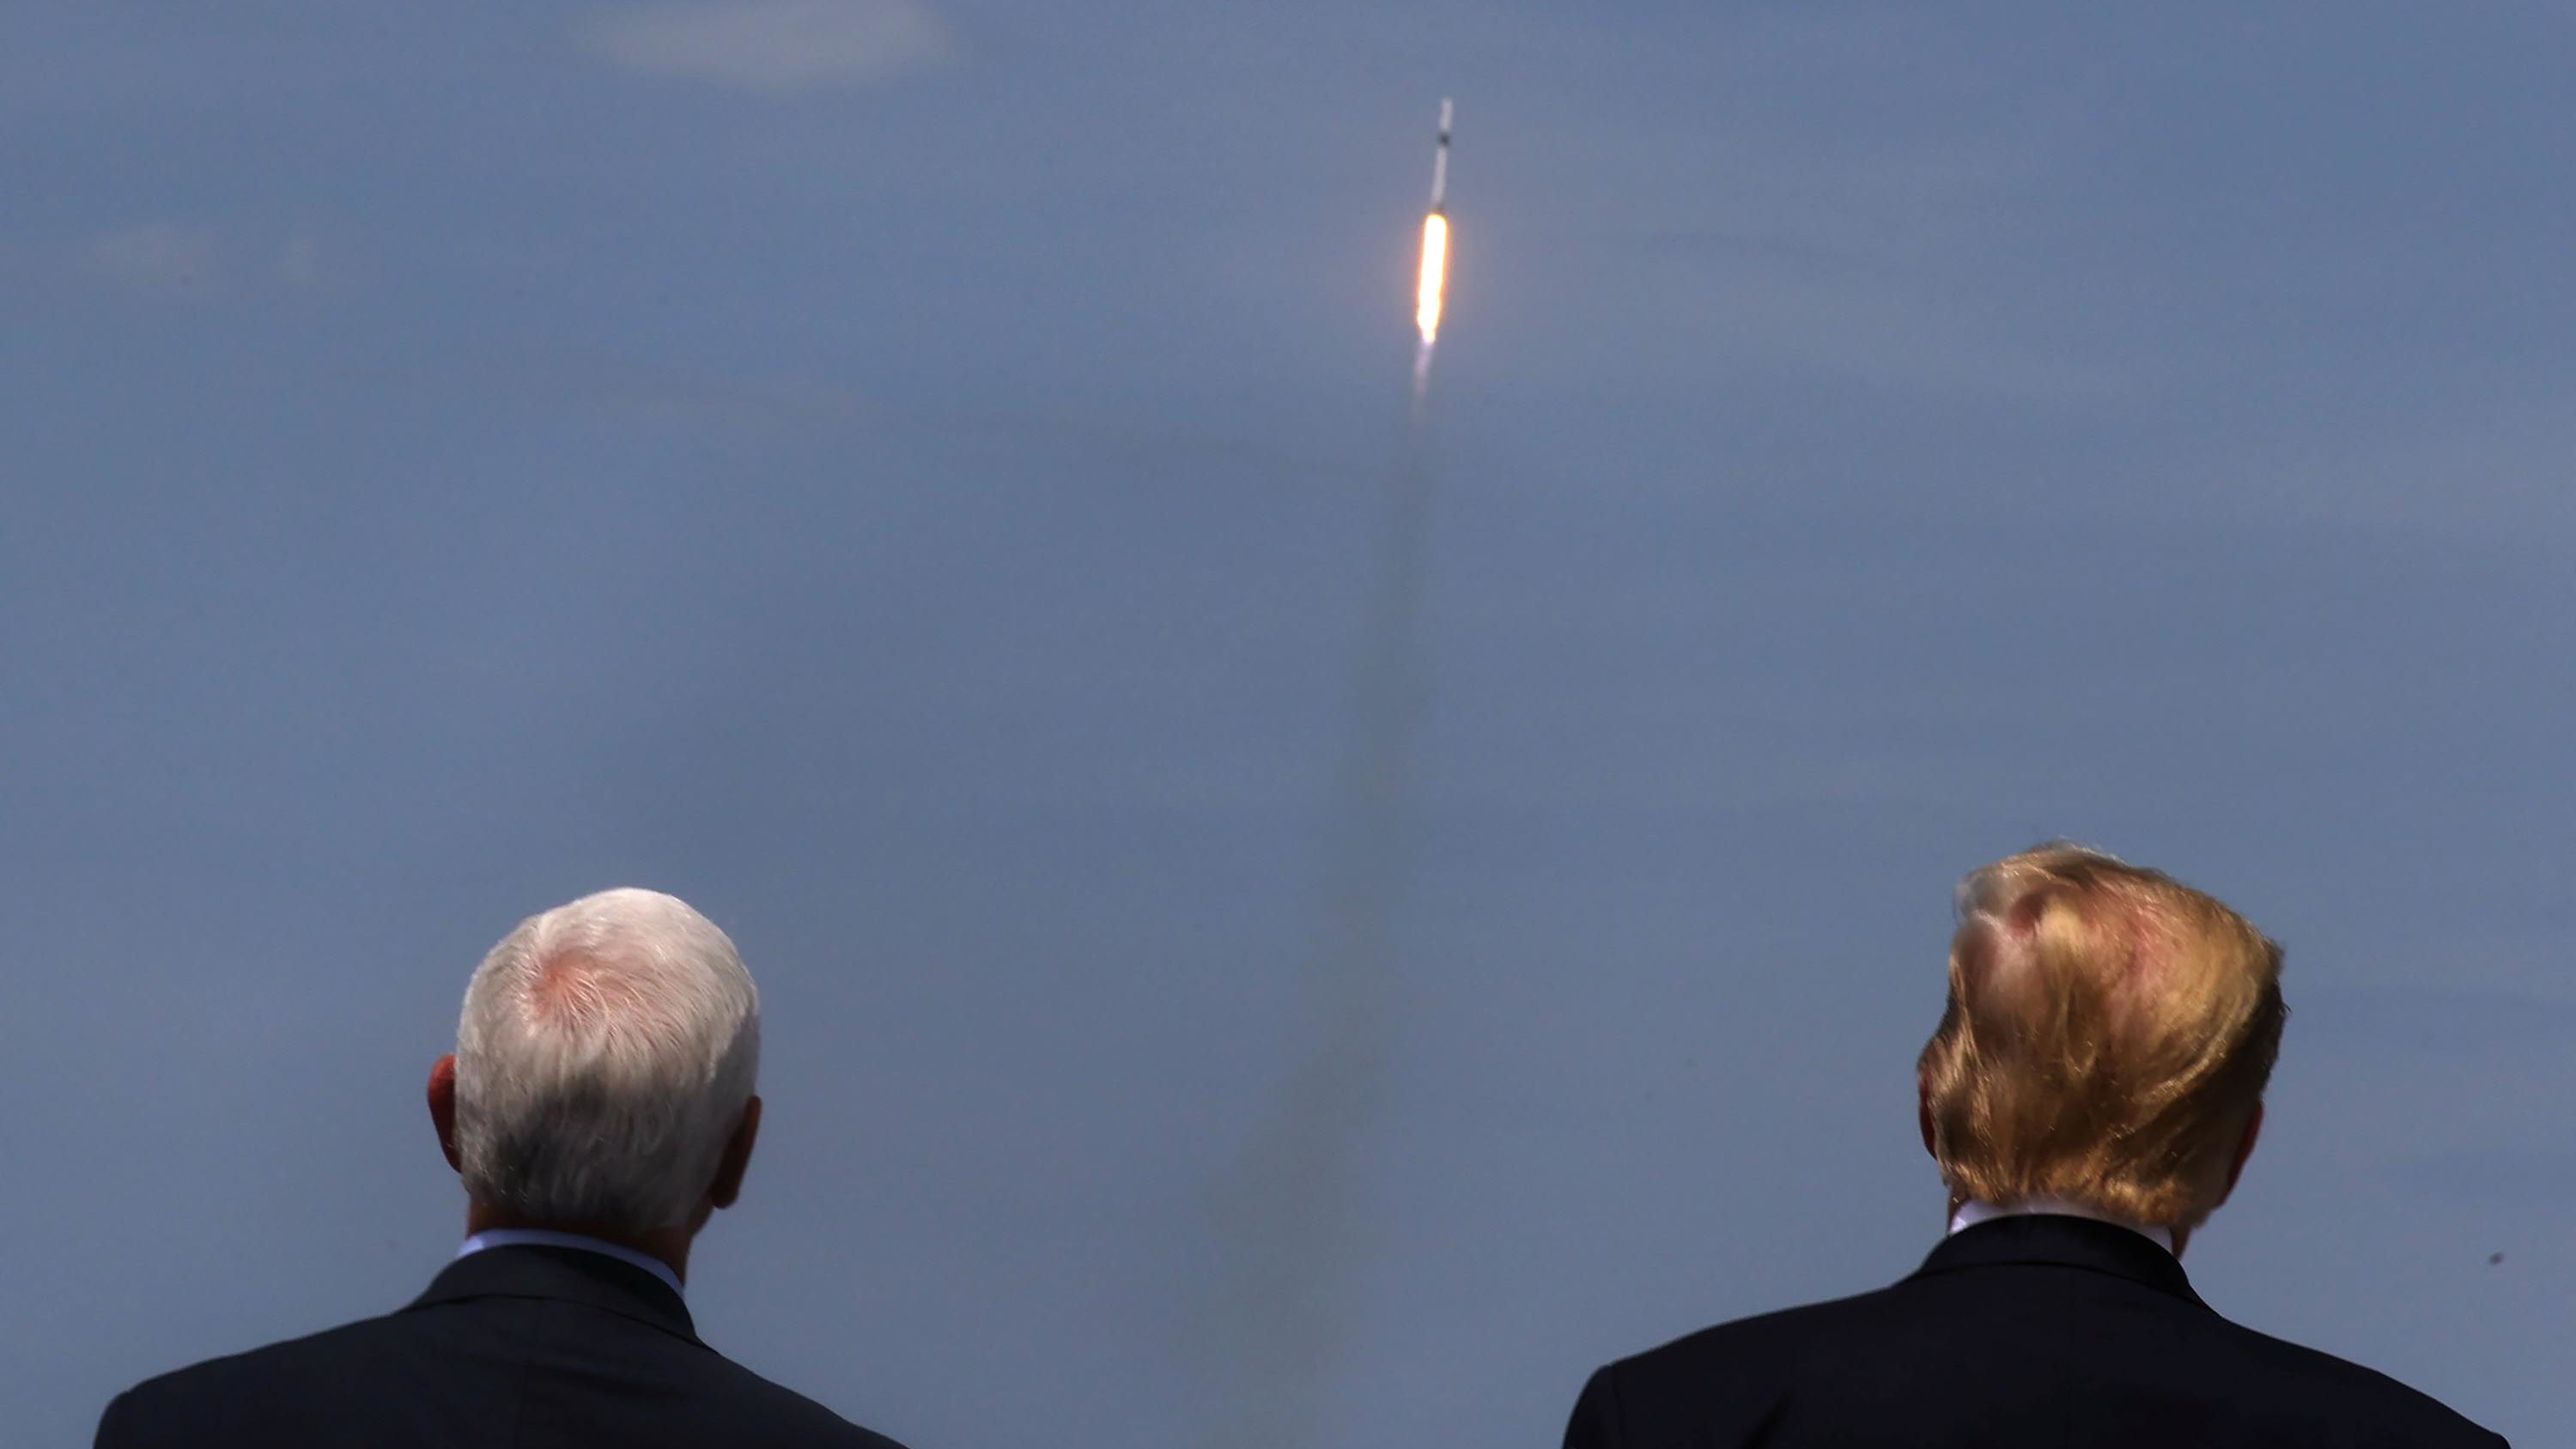 Pence and Trump watch the launch of a SpaceX Falcon 9 rocket in May 2020. It marked the first time in history that a commercial aerospace company carried humans into Earth's orbit.